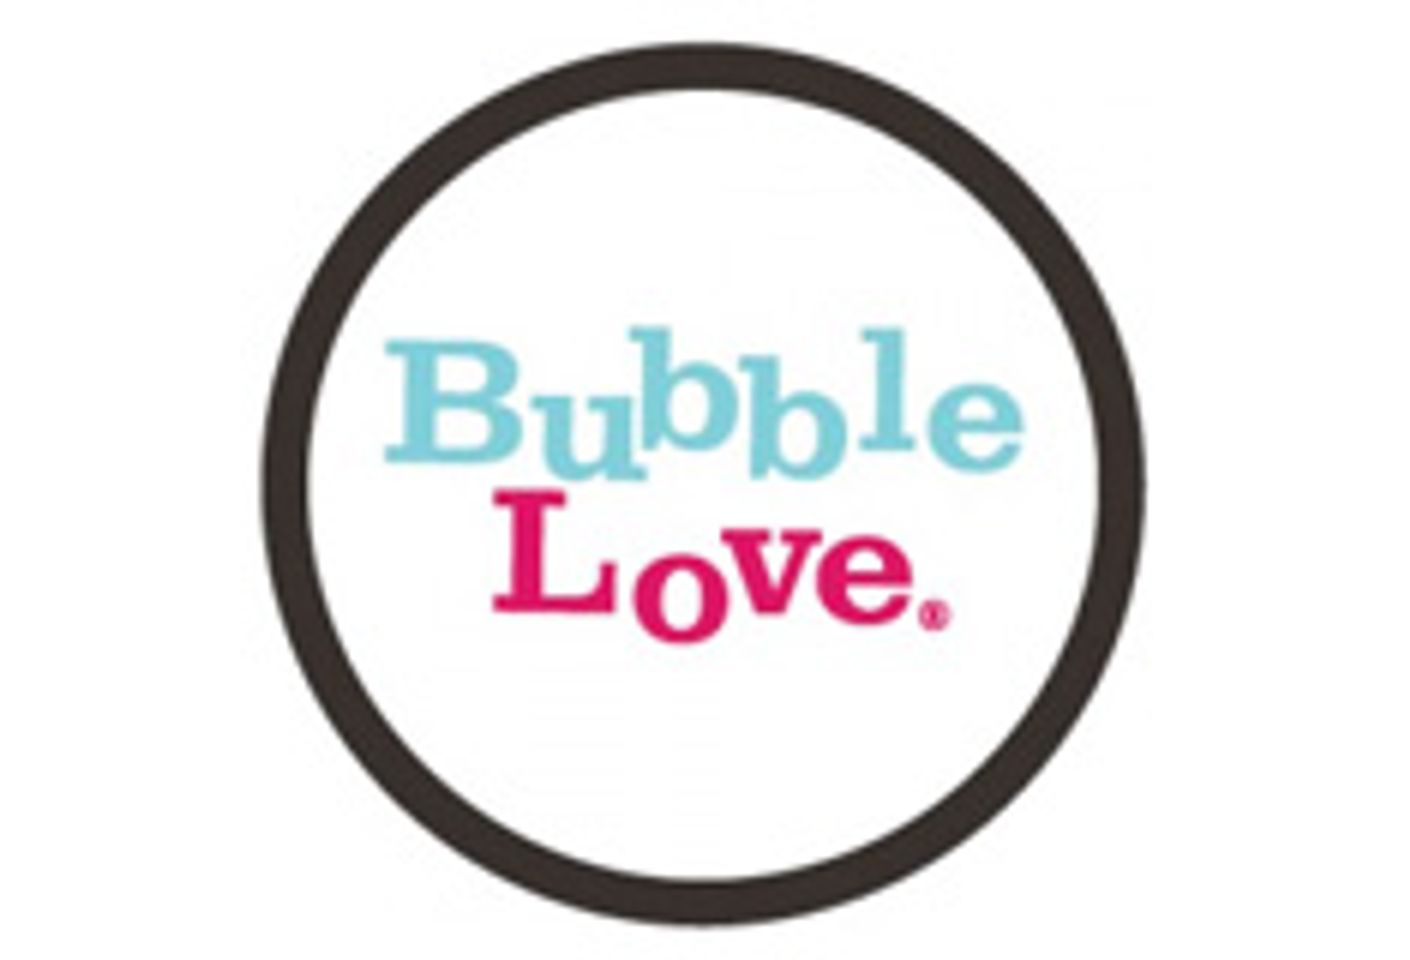 Bubble Love Scores Hot New Product Nom for StorErotica Awards